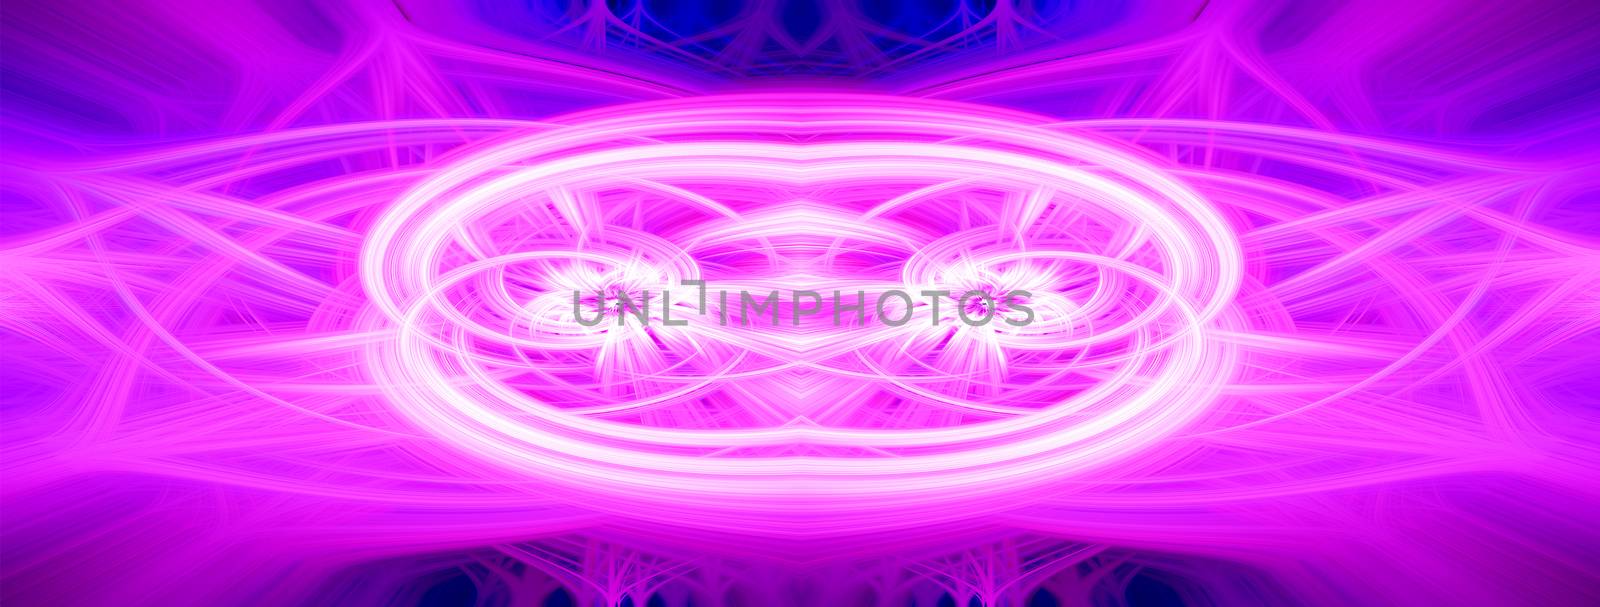 Beautiful abstract intertwined glowing 3d fibers forming a shape of sparkle, flame, flower, interlinked hearts. Pink, purple, blue, and maroon colors. Banner size. Illustration by DamantisZ